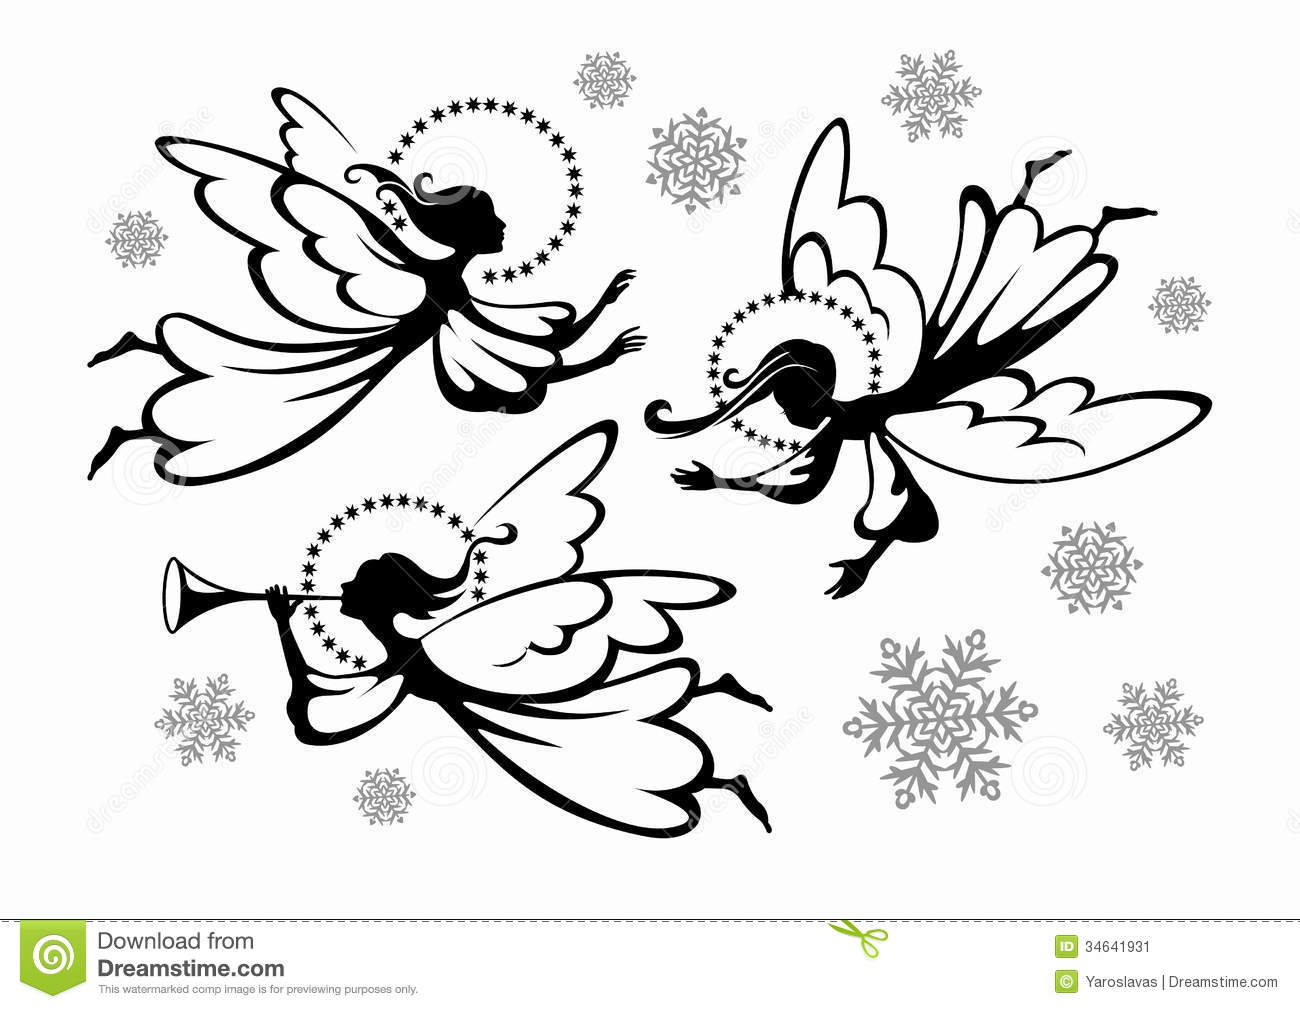 Soaring Christmas Angels With Snowflakes For Festive Design 